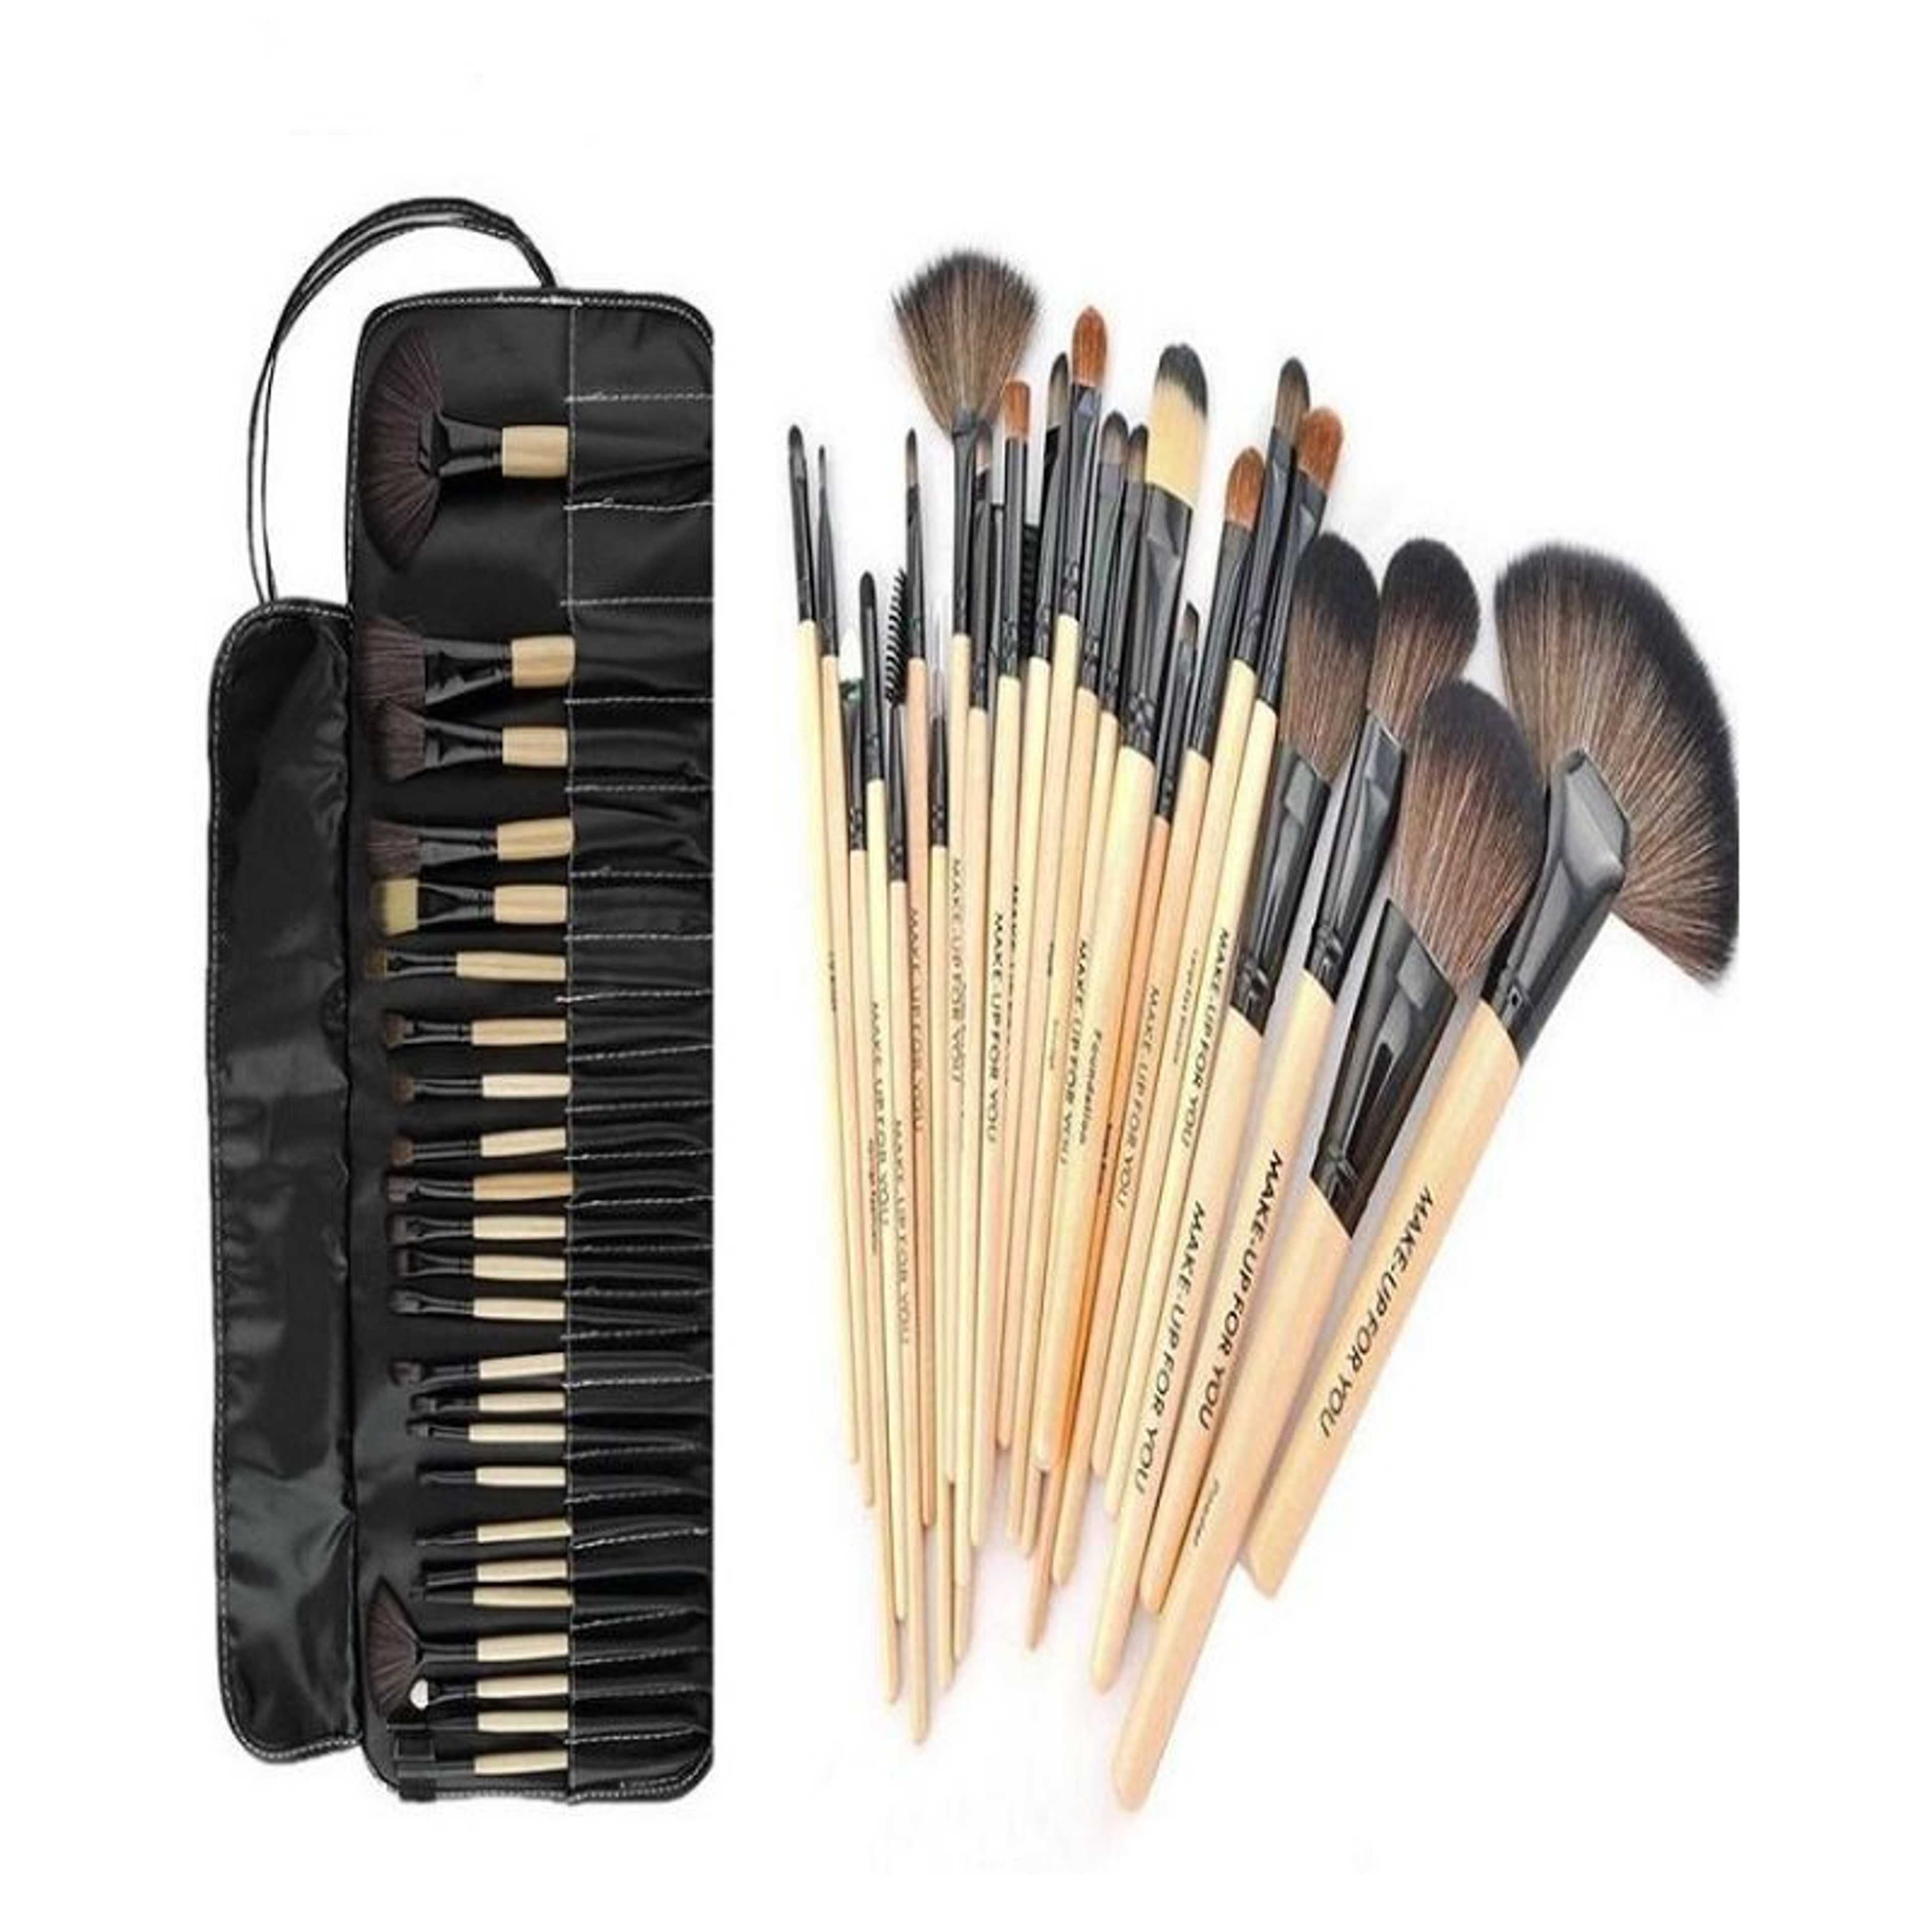 Cosmetic Brushes With Pouch - Black (Pack Of 24)